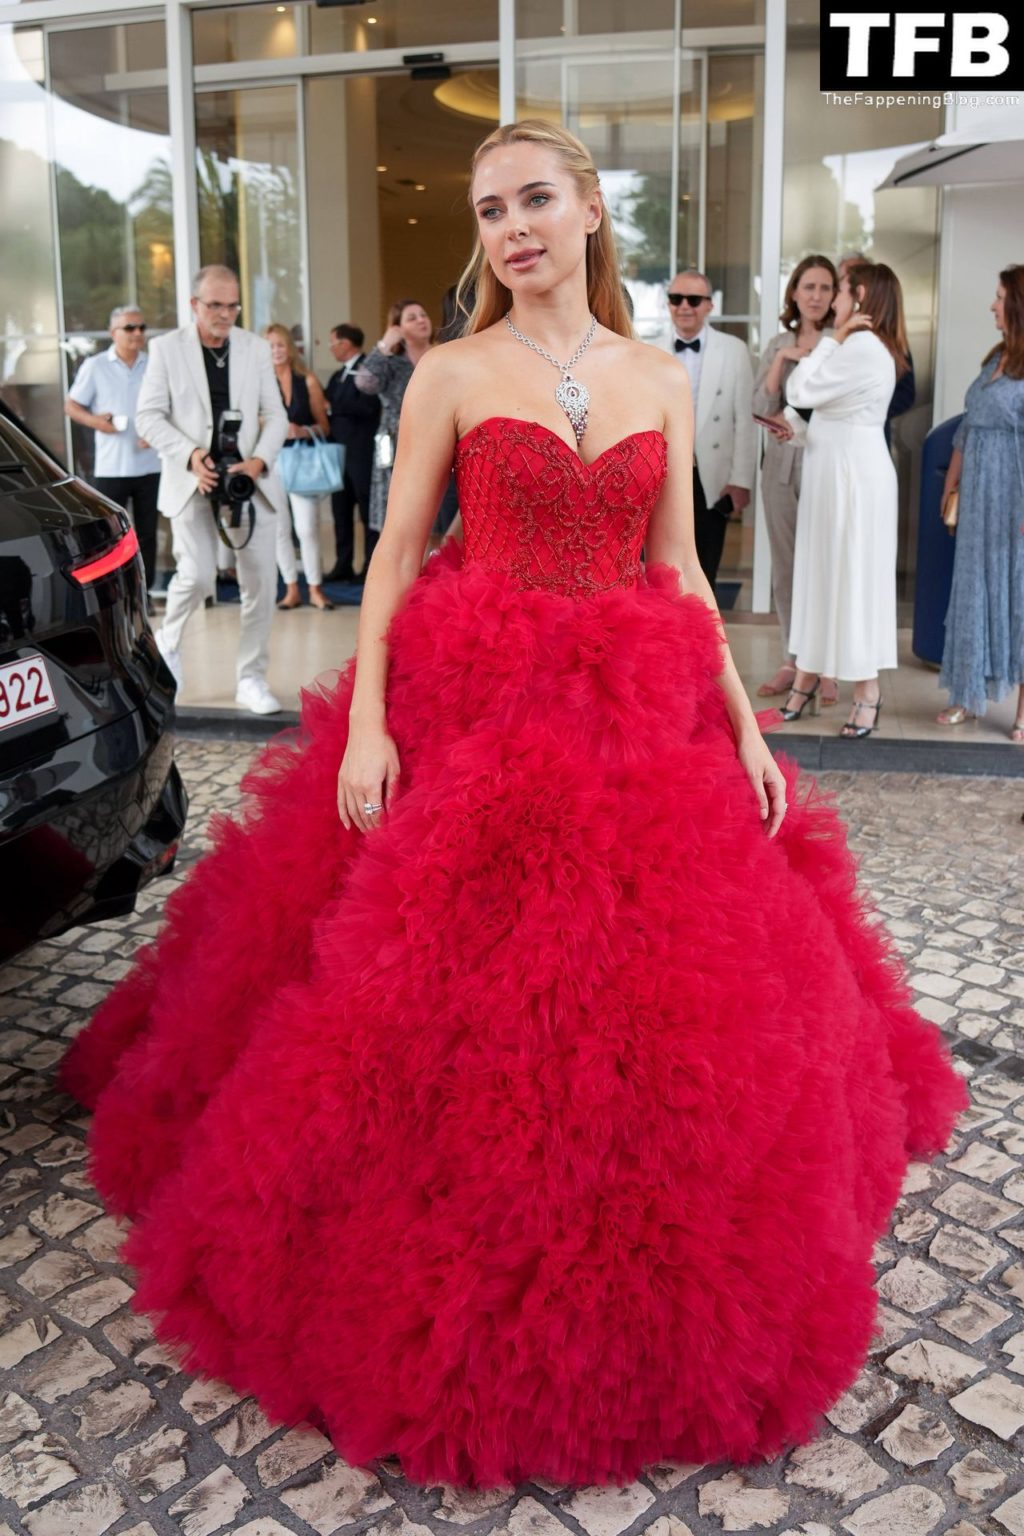 Kimberley Garner Sexy The Fappening Blog 131 1024x1536 - Kimberley Garner Looks Hot in a Red Dress at the 75th Annual Cannes Film Festival (134 Photos)